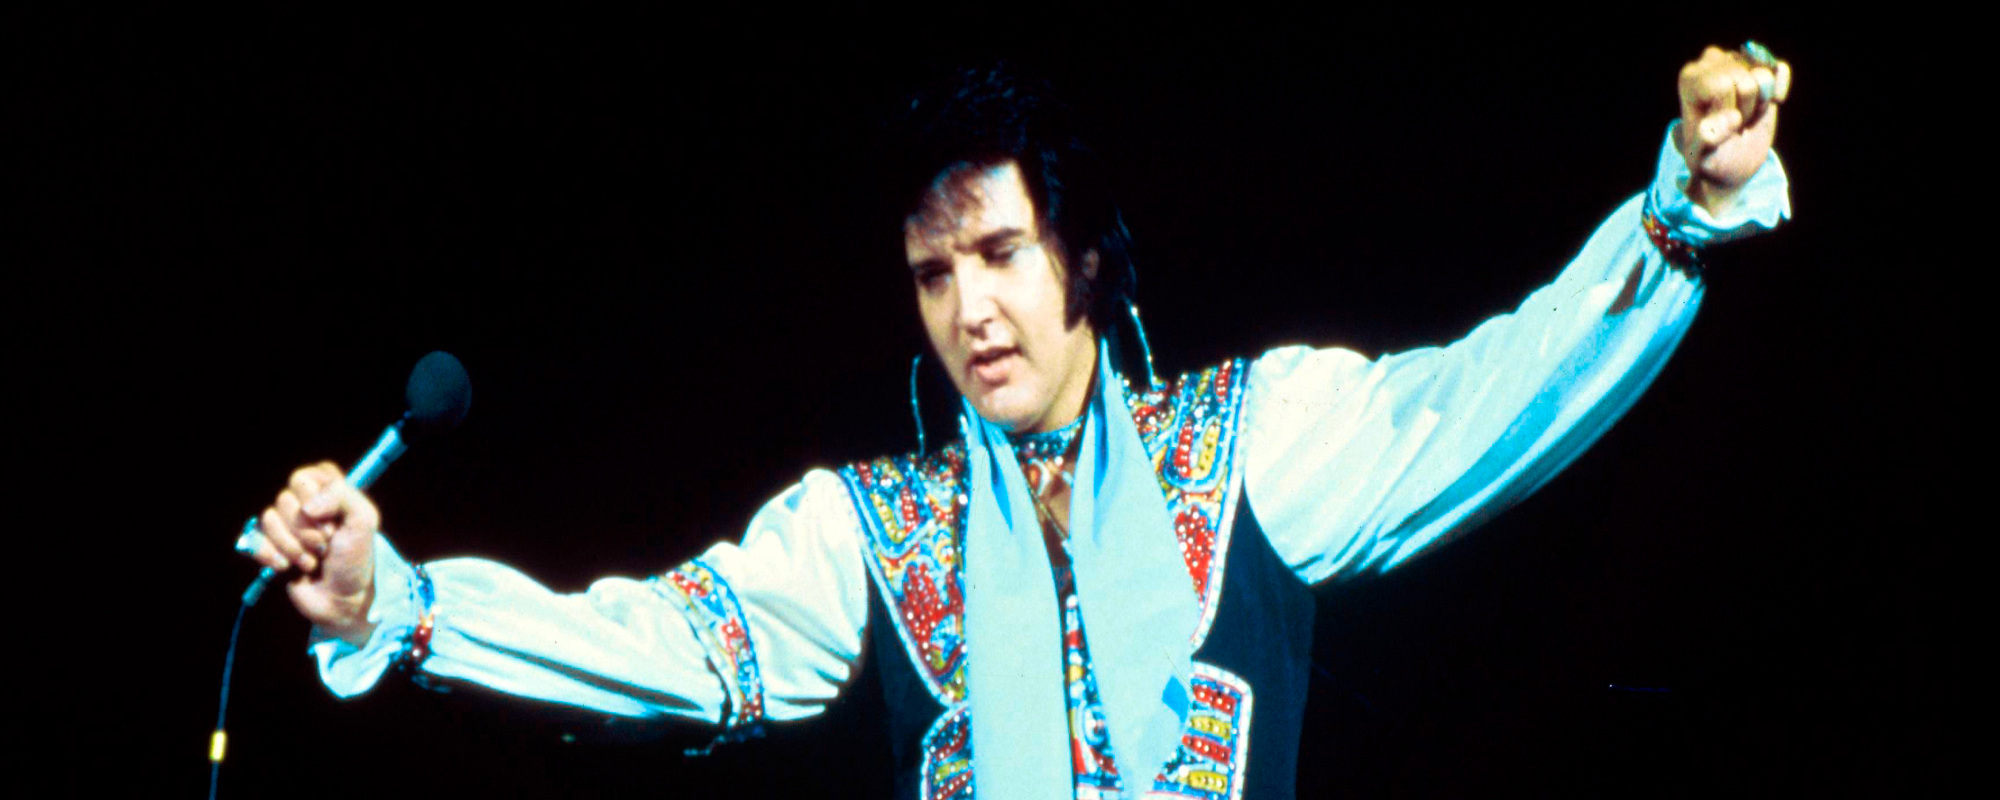 7 Songs You Didn’t Know Elvis Presley Got Writing Credit for but Didn’t Write